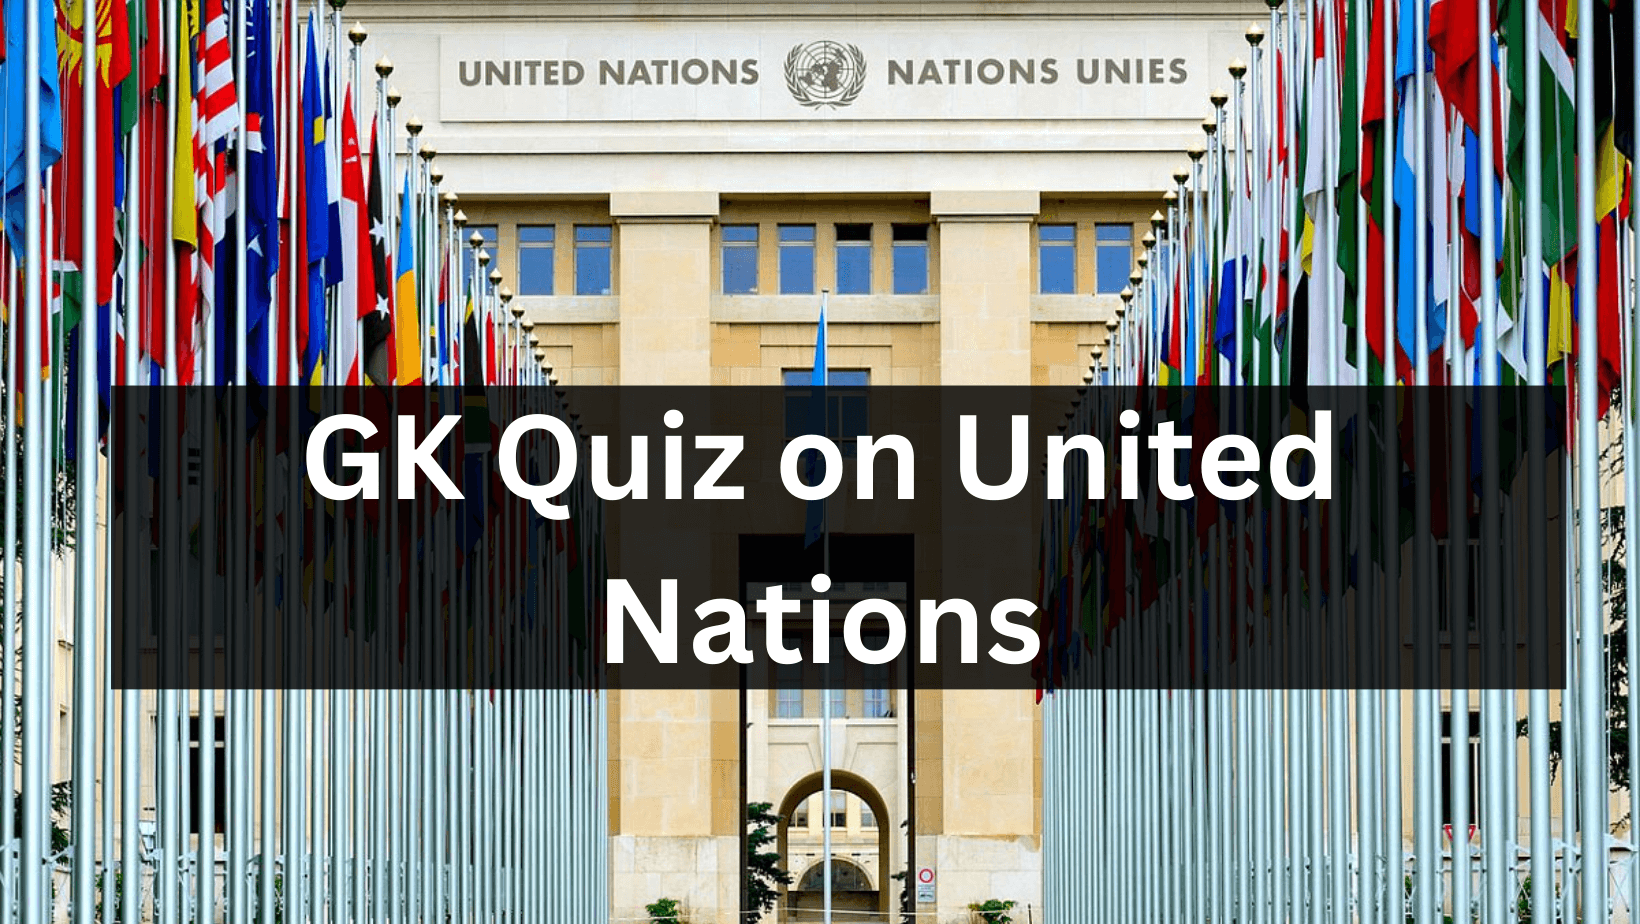 GK Quiz on the United Nations